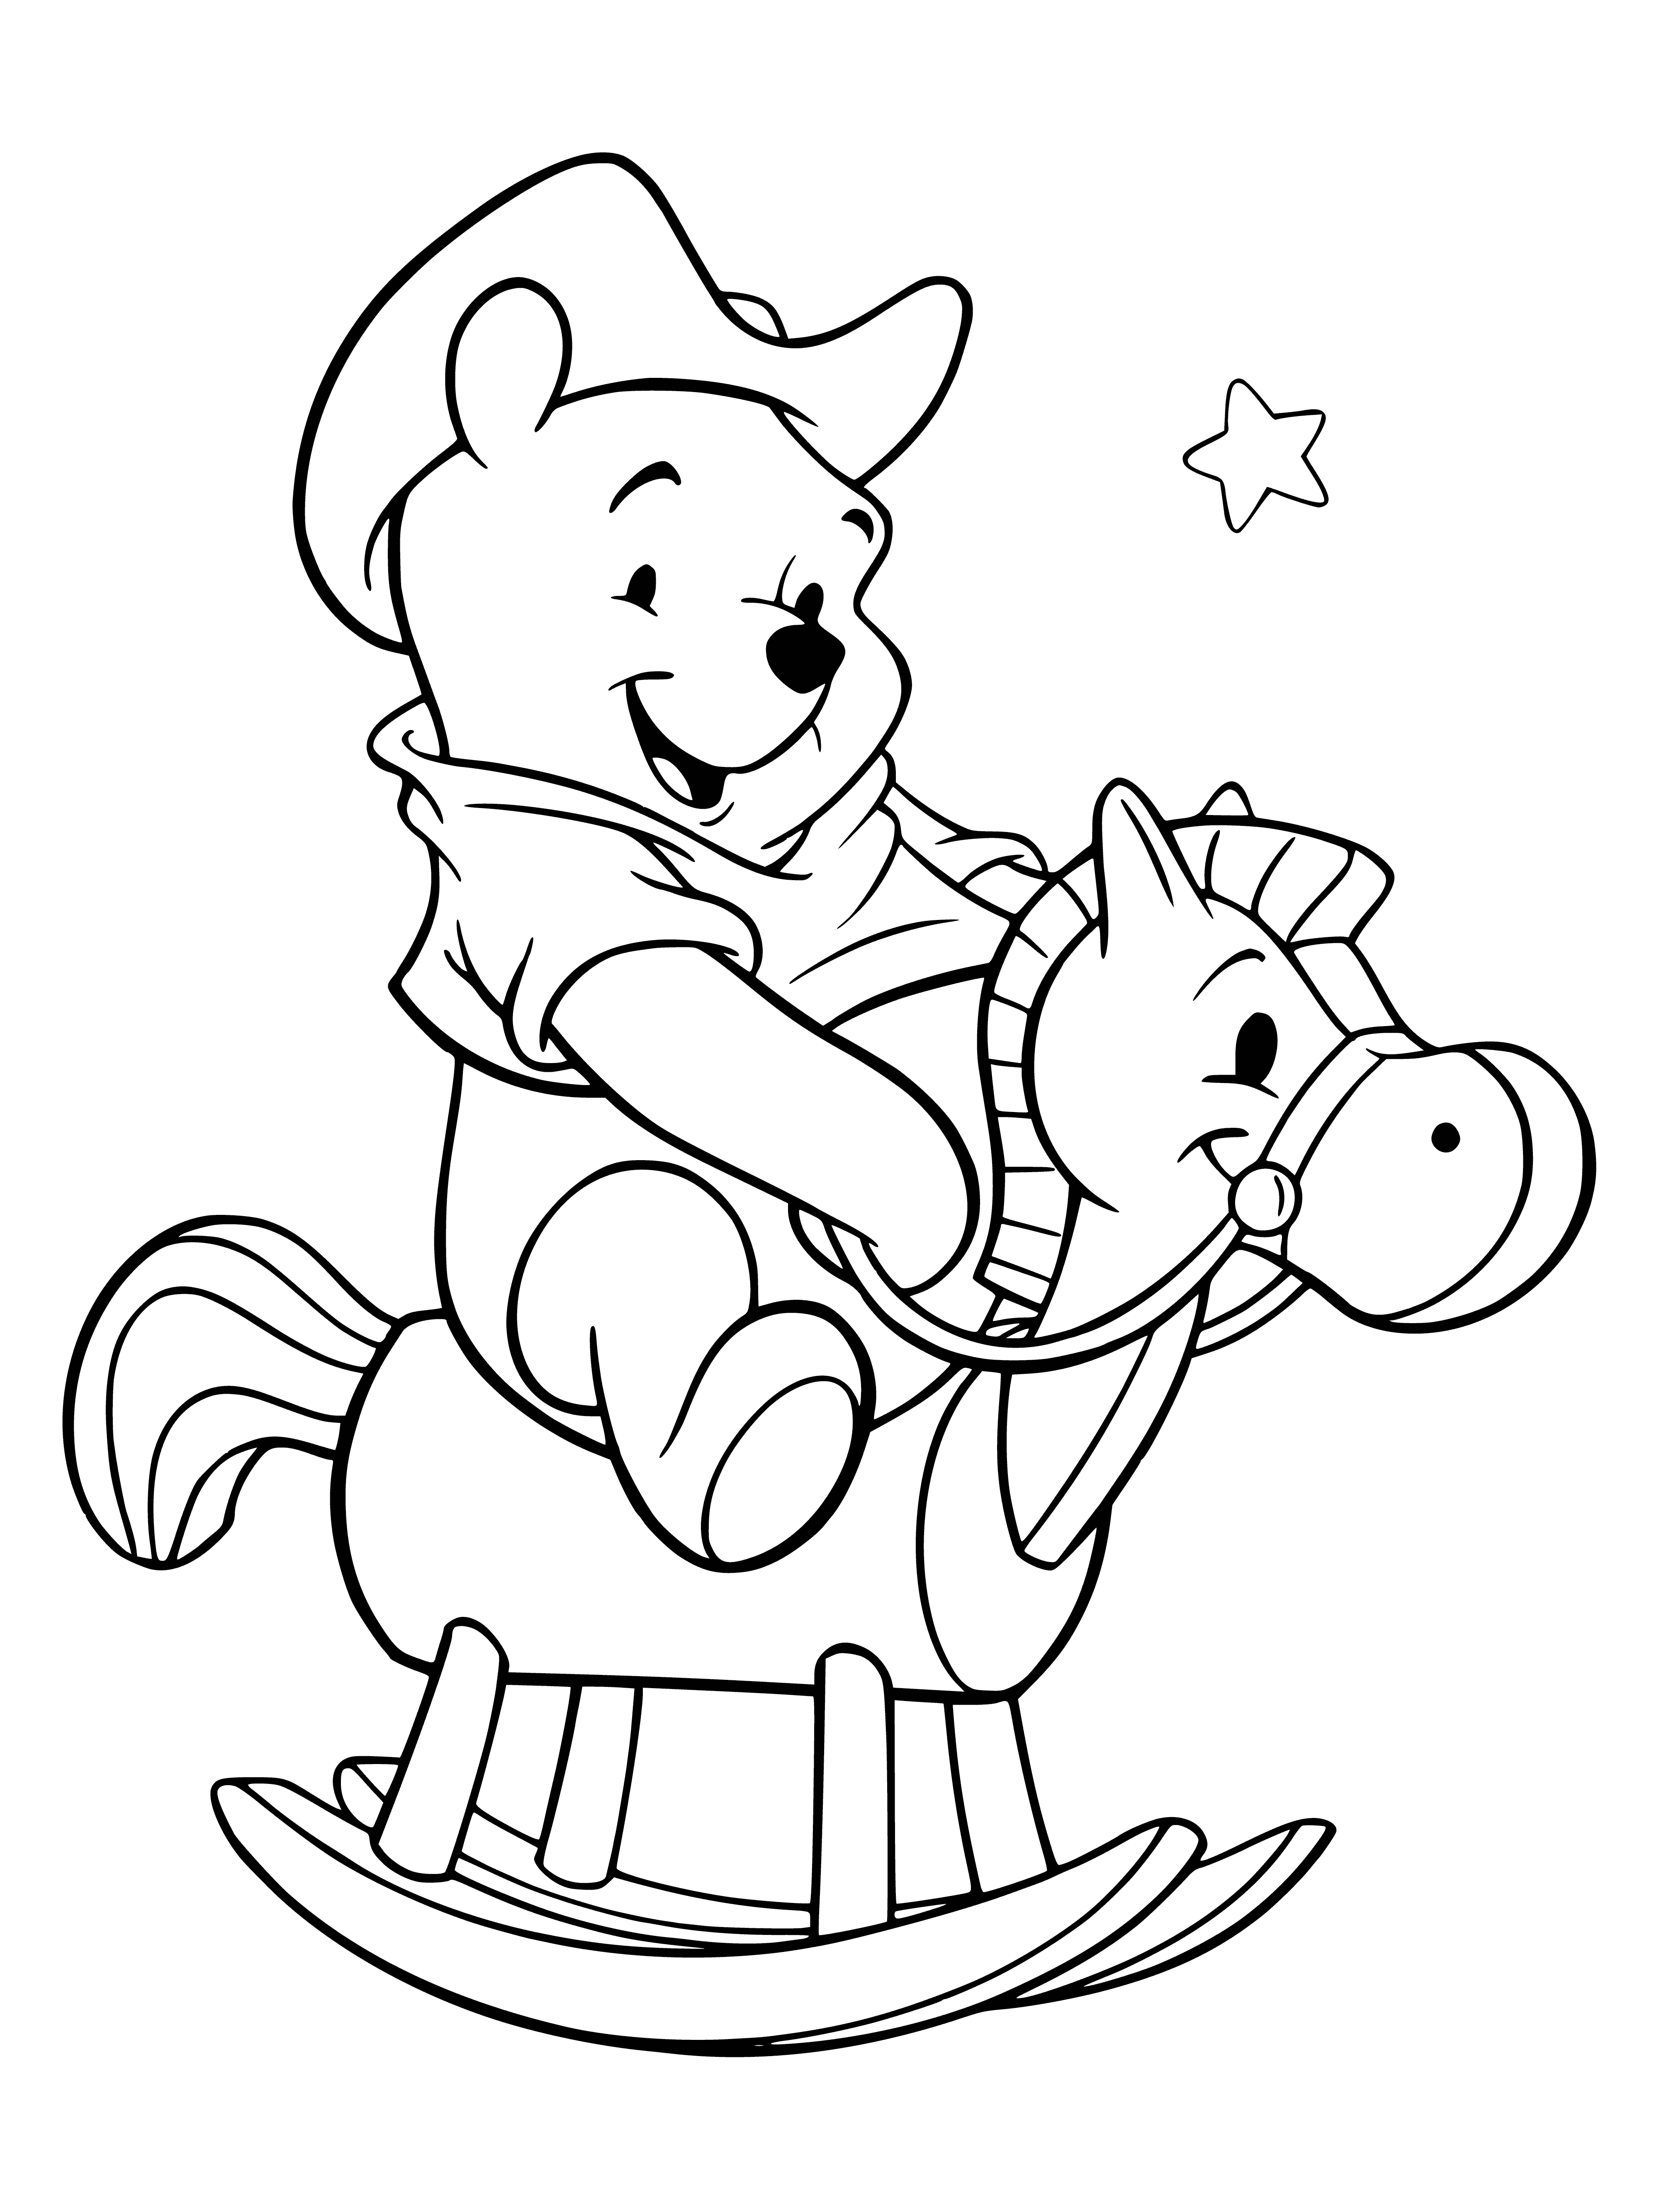 coloring page: Cowboy Winnie the Pooh wears a hat, red shirt, blue jeans, and carries a lasso and gun. He stands next to a yellow/red barn and green tree.